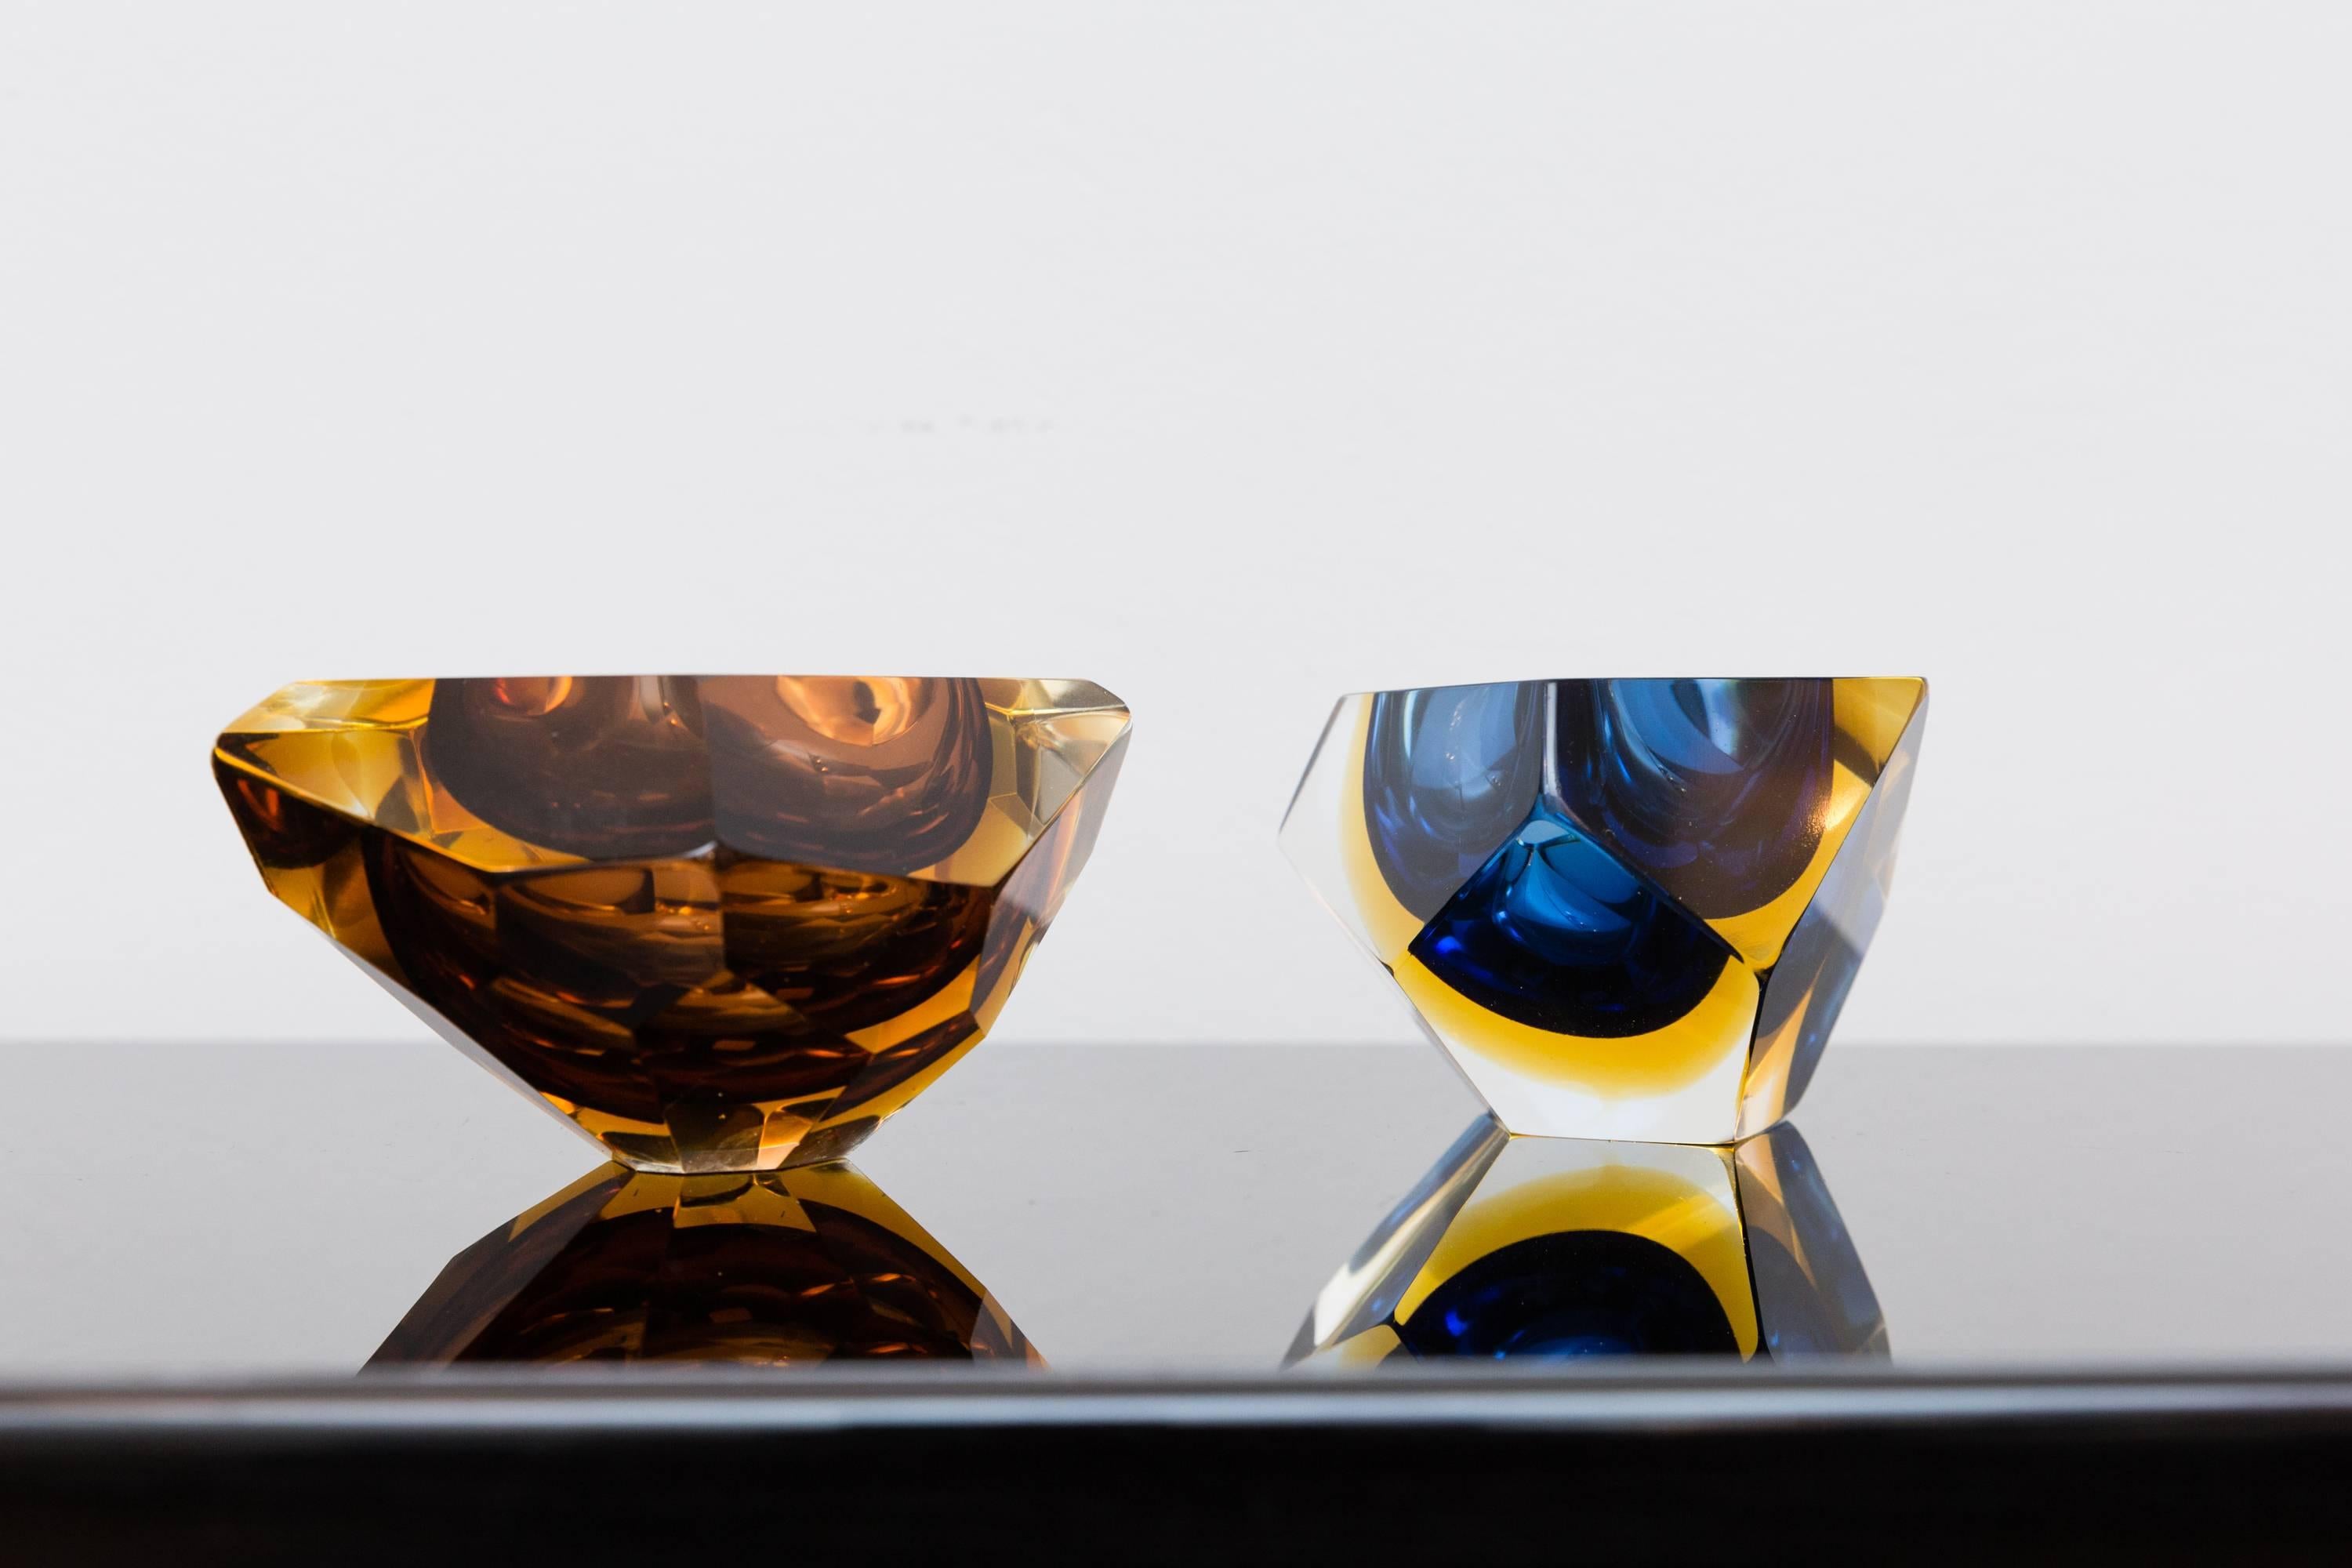 Beautiful multi-color set of two unusual faceted Bowls, Murano, Italy, circa 1960, Prod. Sommerso, different colors by orange, amber-yellow, blue, into clear glass. The vibrant colors and the different sizes make this pieces highly decorative.